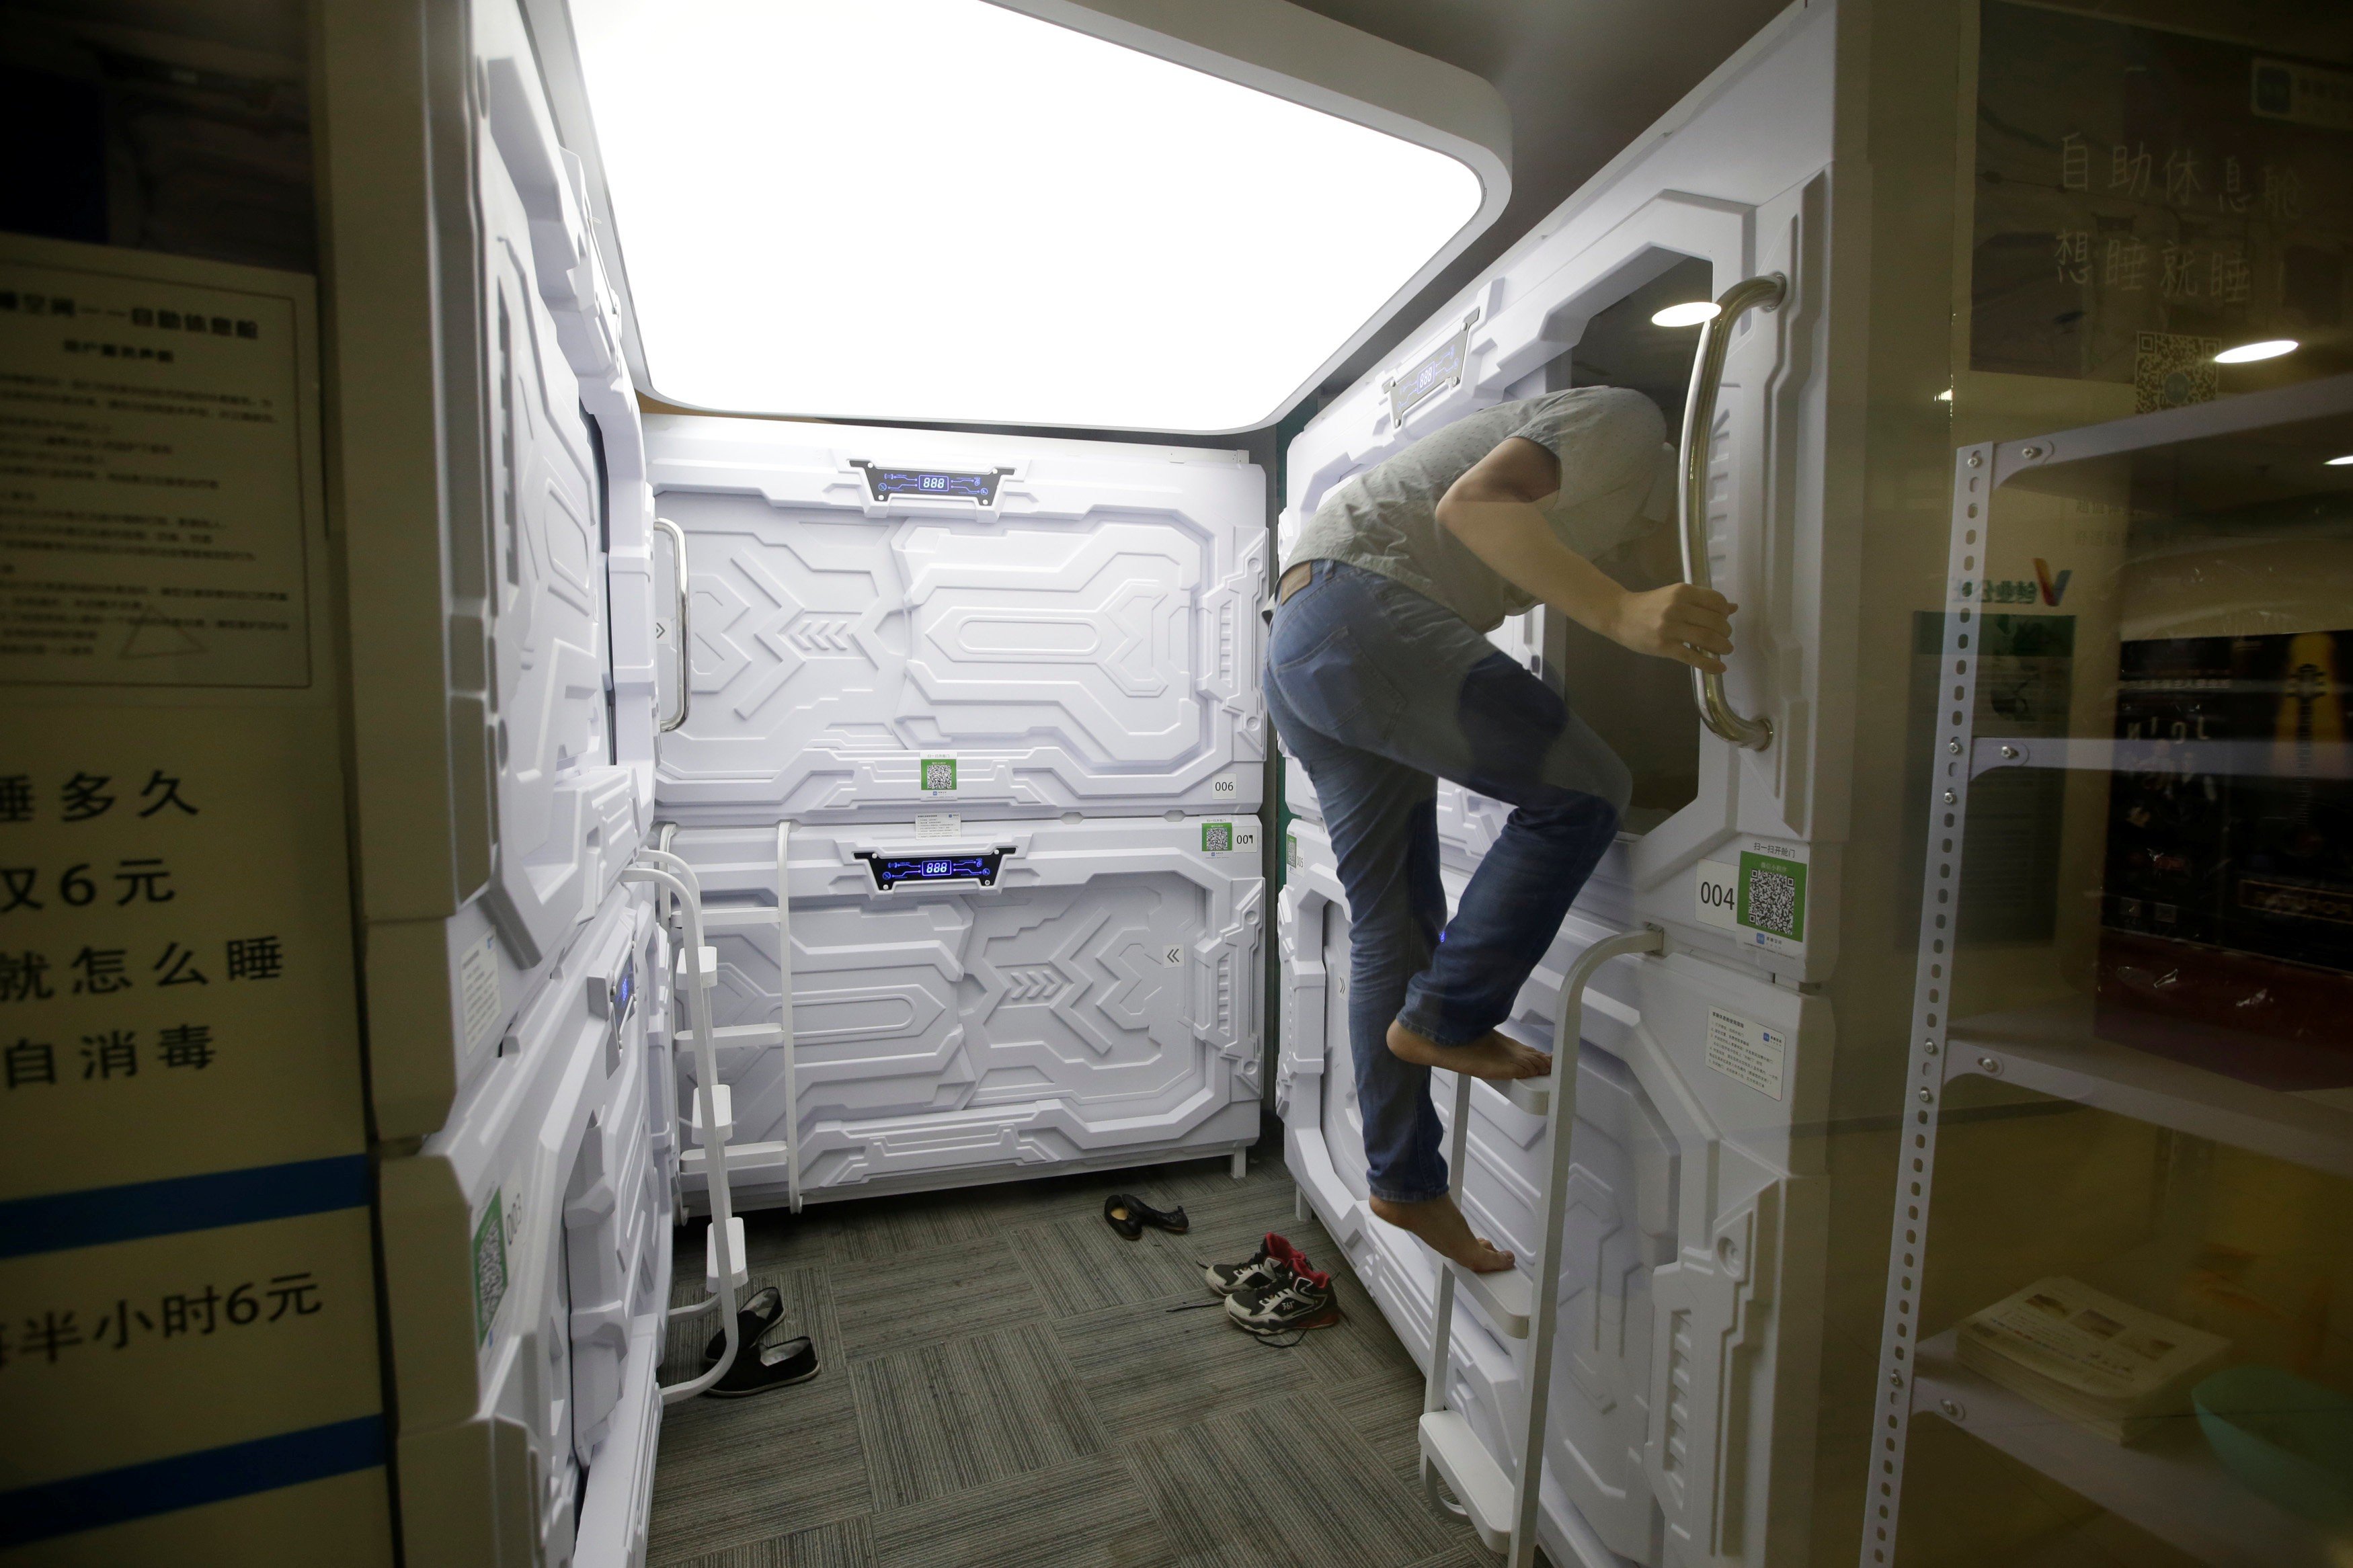 A man climbs up a ladder as he prepares to sleep in a capsule bed unit at Xiangshui Space during a lunch break in Beijing's Zhongguancun area. Photo: Reuters